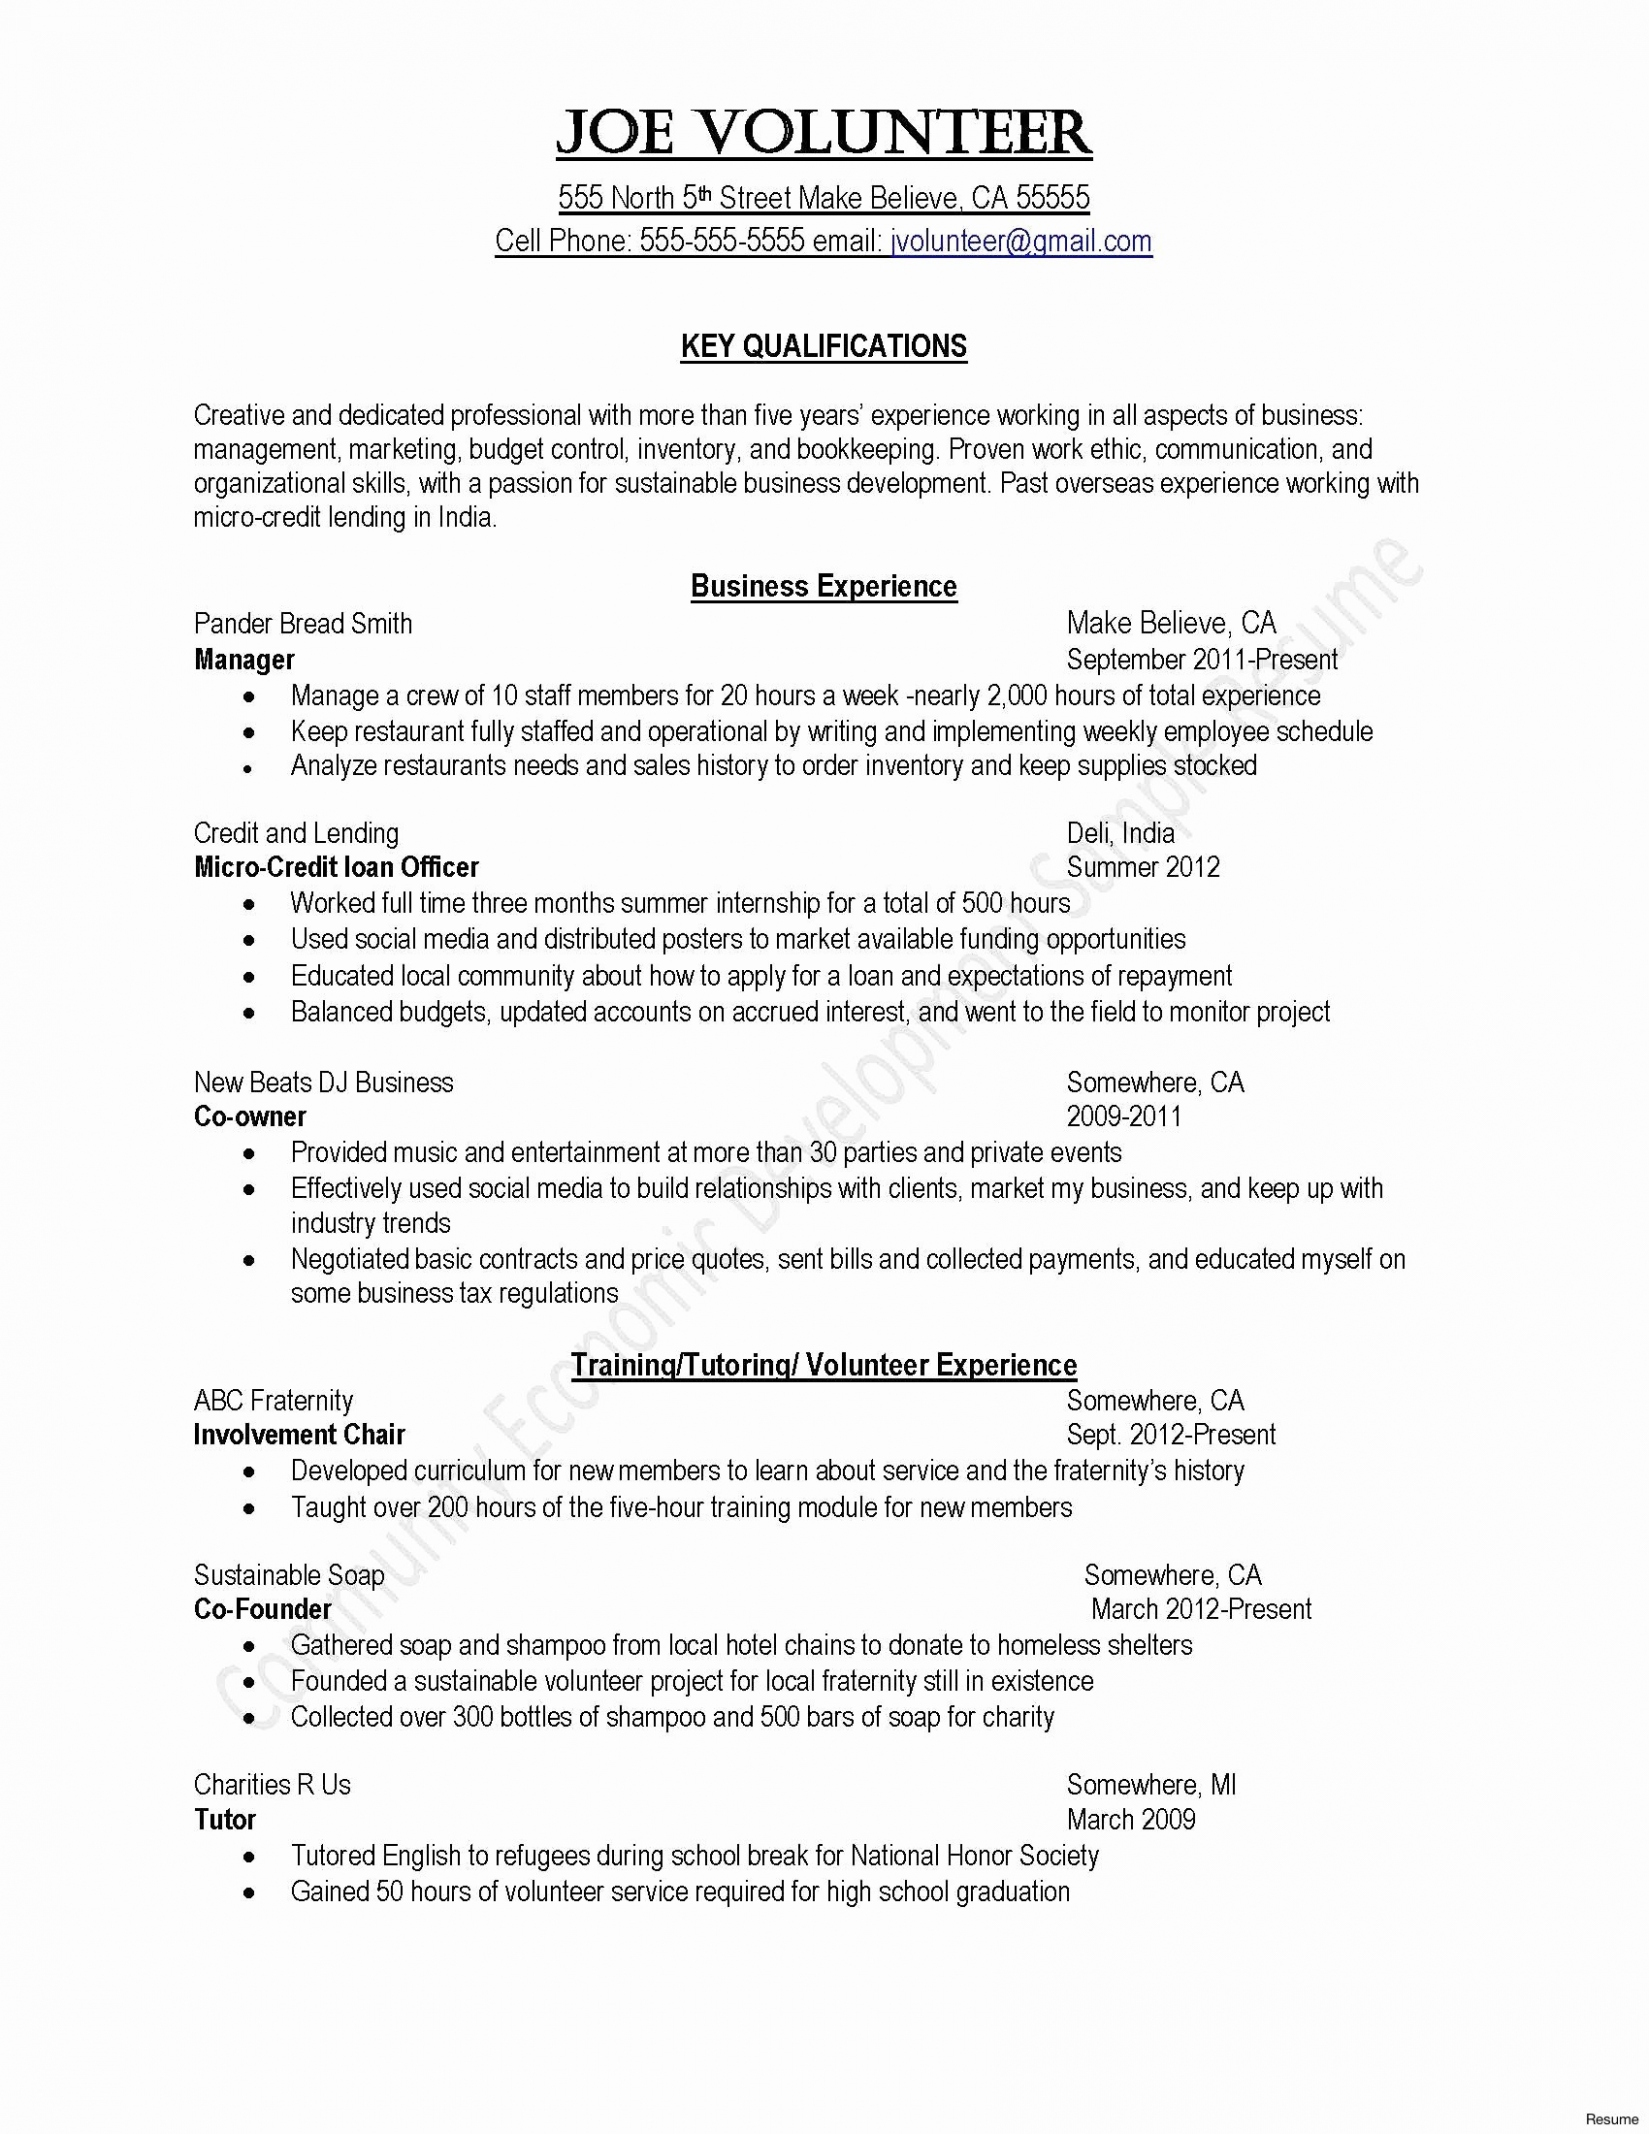 High School Student Resume Career Objective Examples For Microbiologist Resume Unique Image Scholarship Resume High School Student Resume Objective By Jonathan Of Career Objective Examples For Microb high school student resume|wikiresume.com